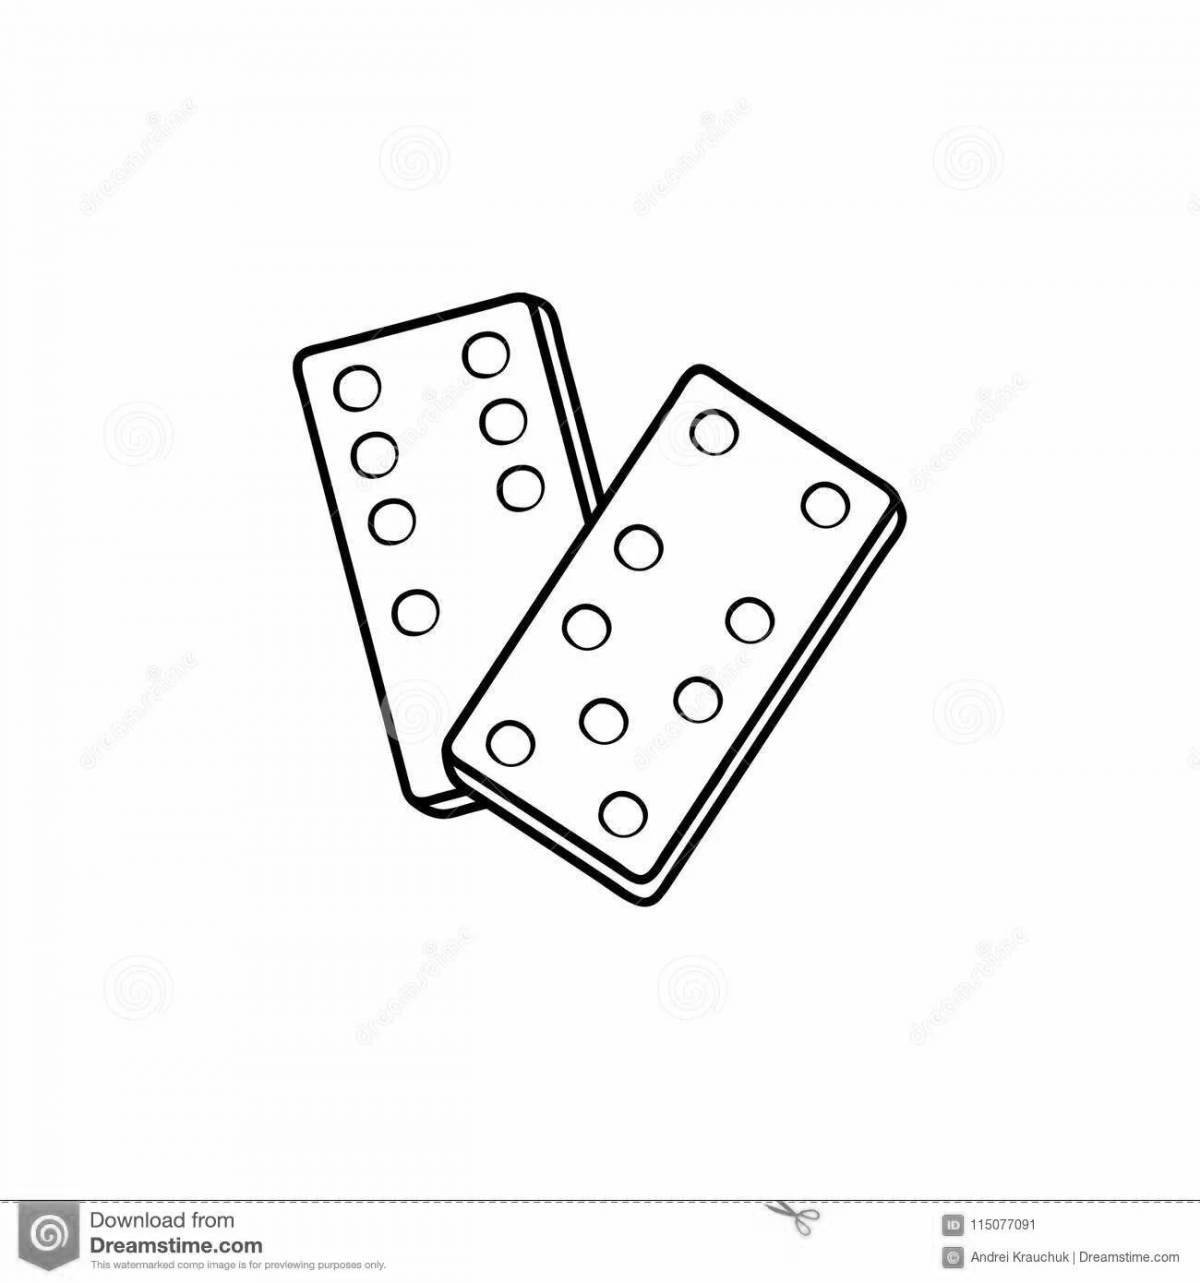 Colourful domino coloring page for college students